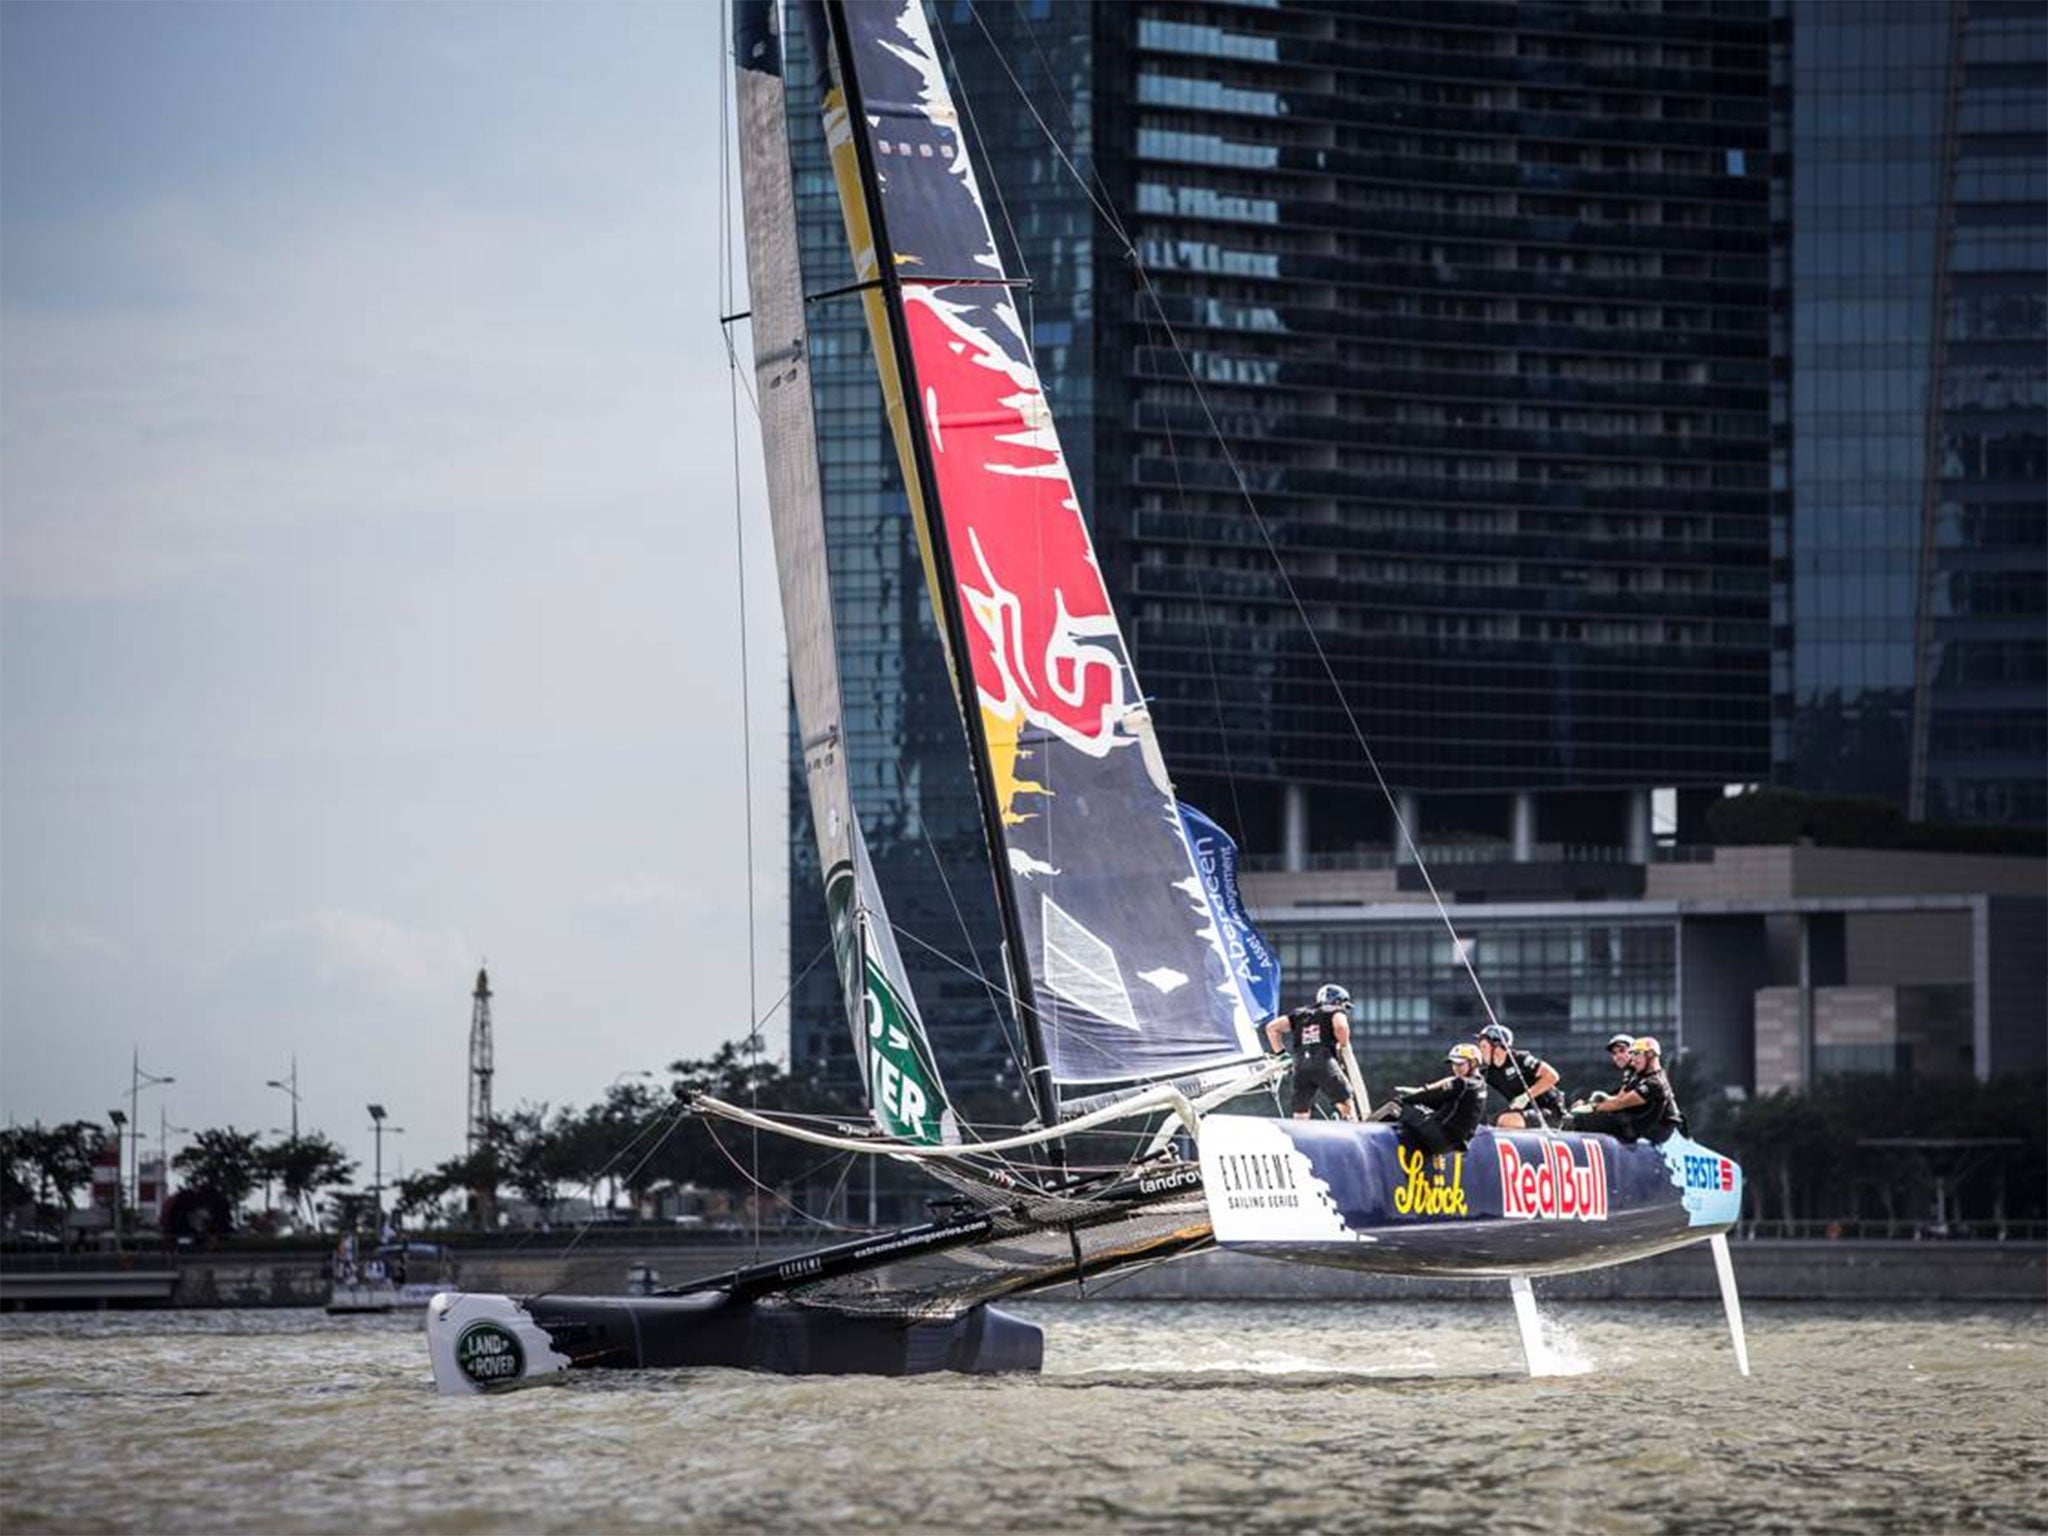 They have been trying for the last five years but Roman Hagara’s Red Bull team finally topped the podium at the Singapore 2015 opener of the Extreme Sailing Series.